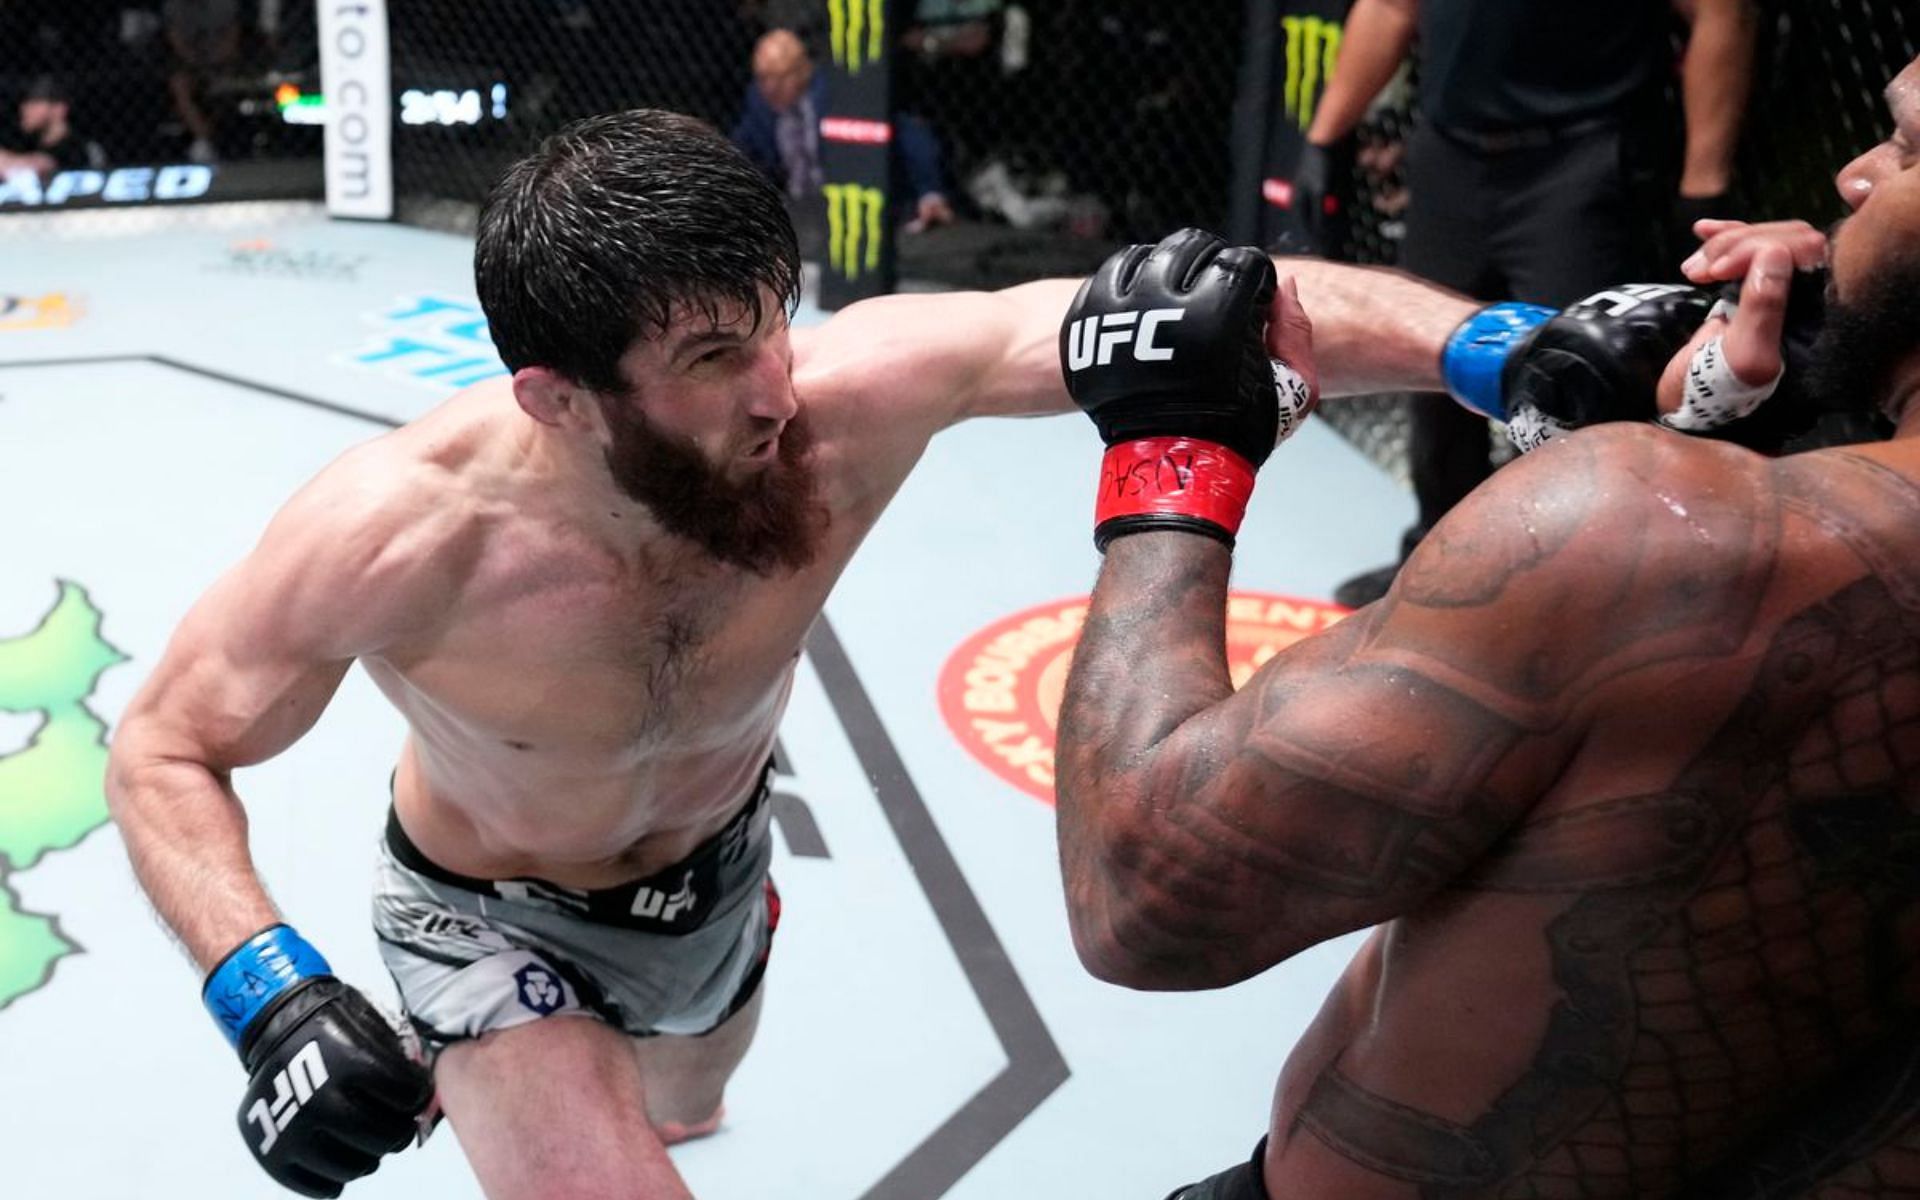 Magomed Ankalaev picked up the biggest win of his octagon career over Thiago Santos last night.